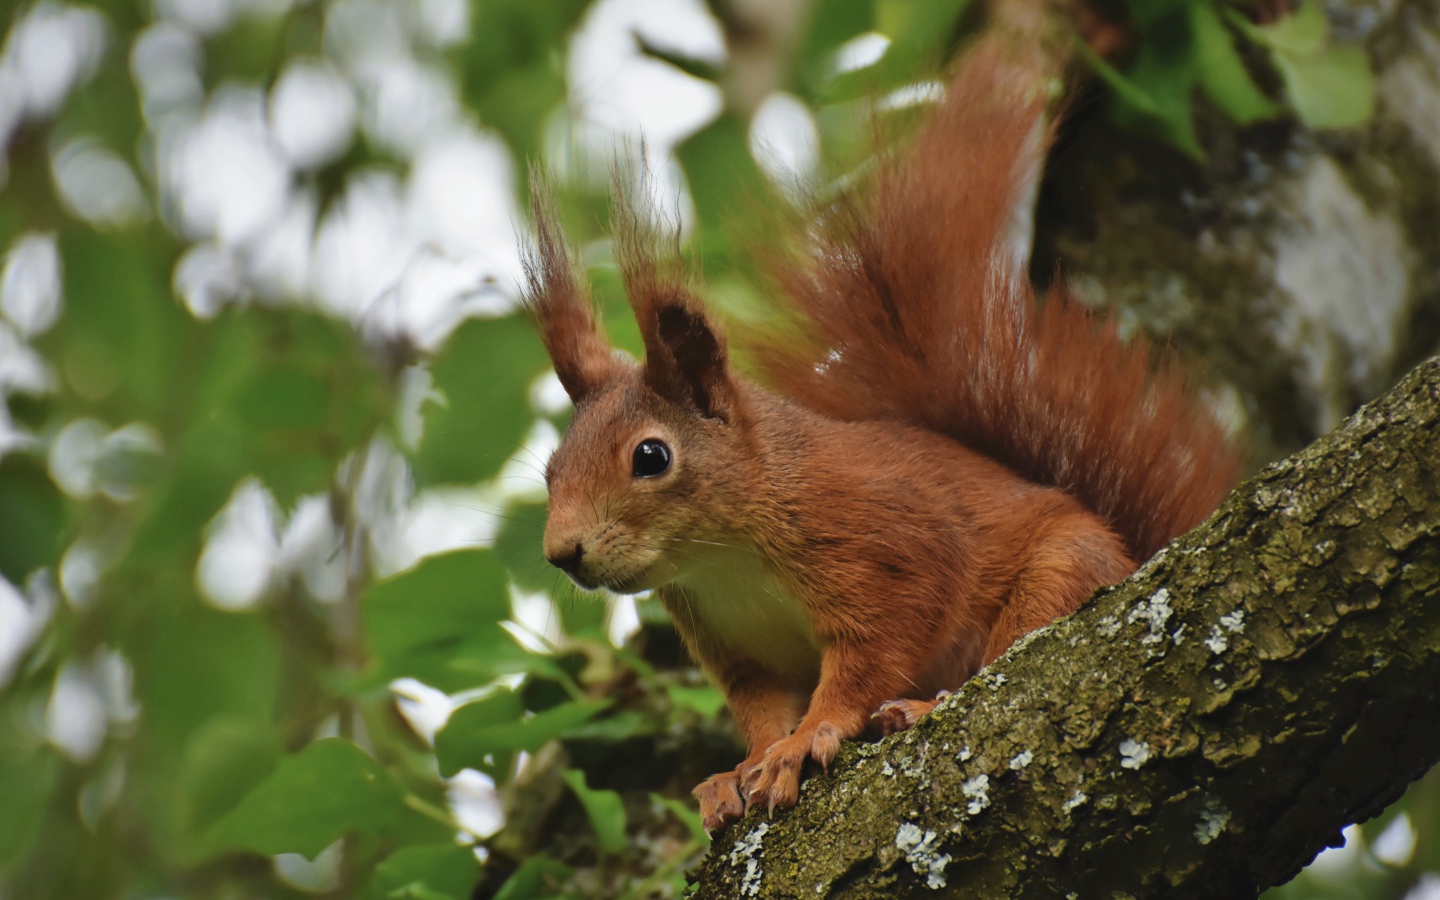 Red squirrel sits on a tree branch with green leaves